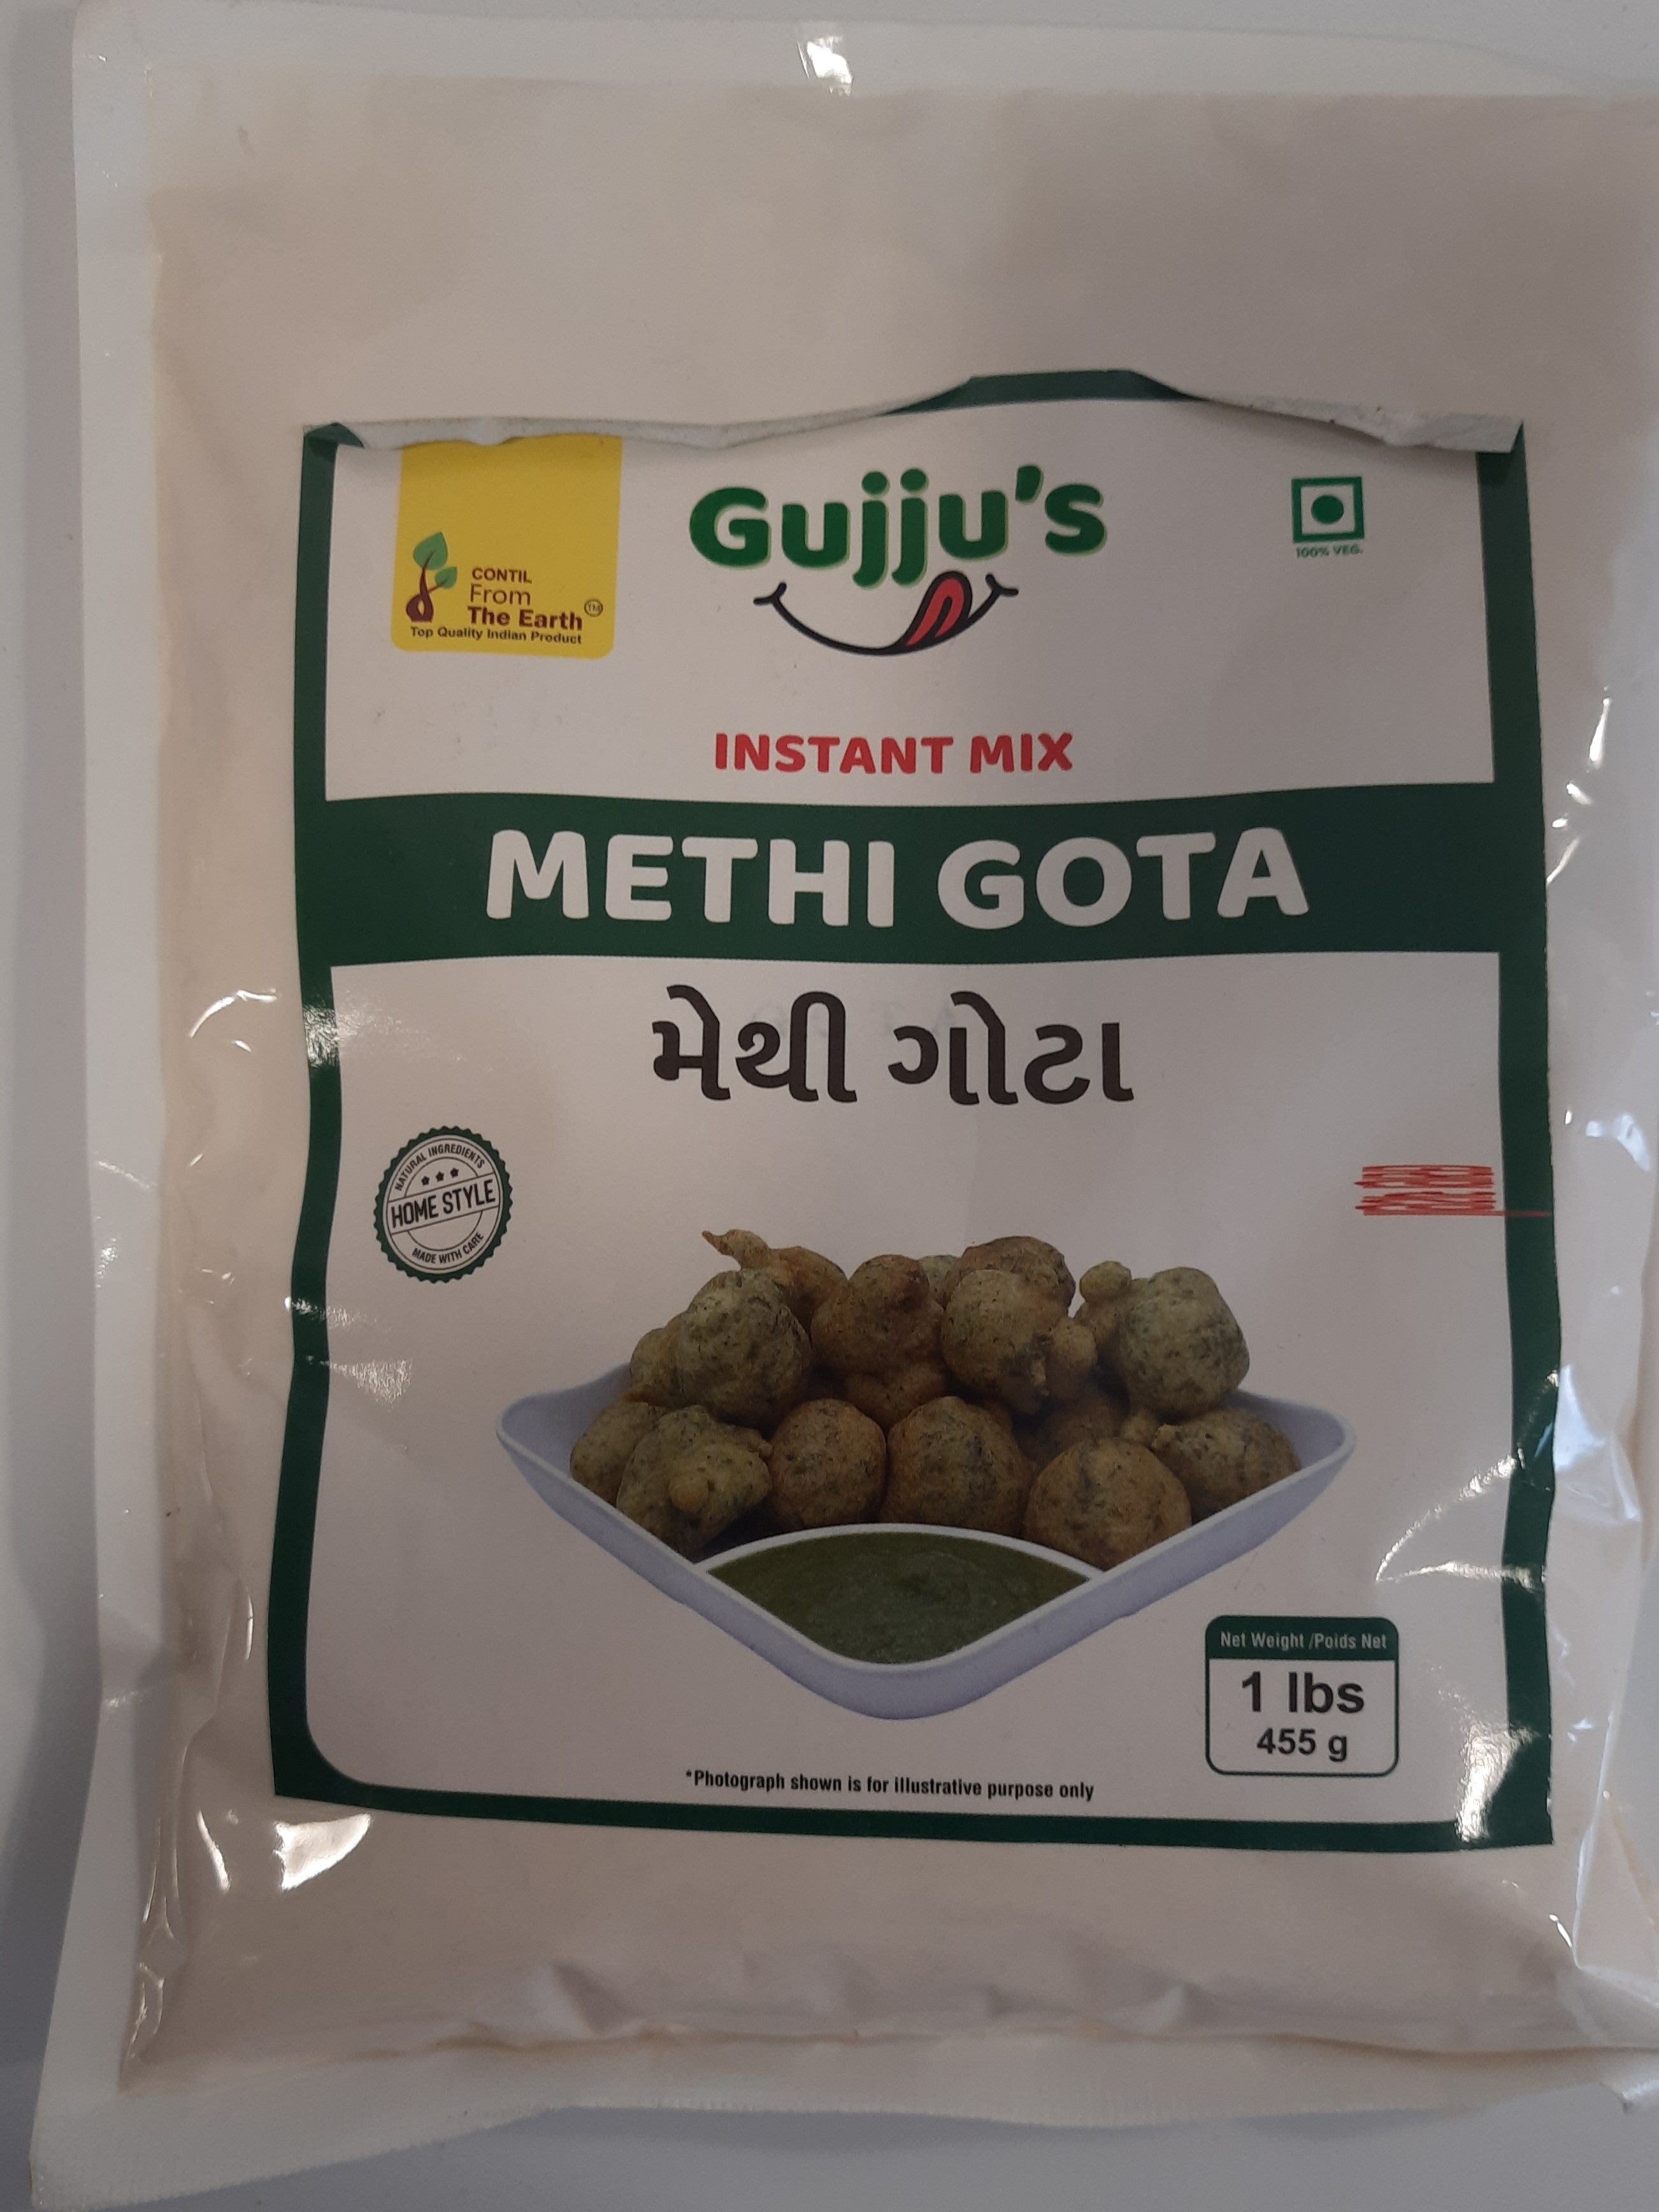 From the Earth - Instant Methi Gota 1lb